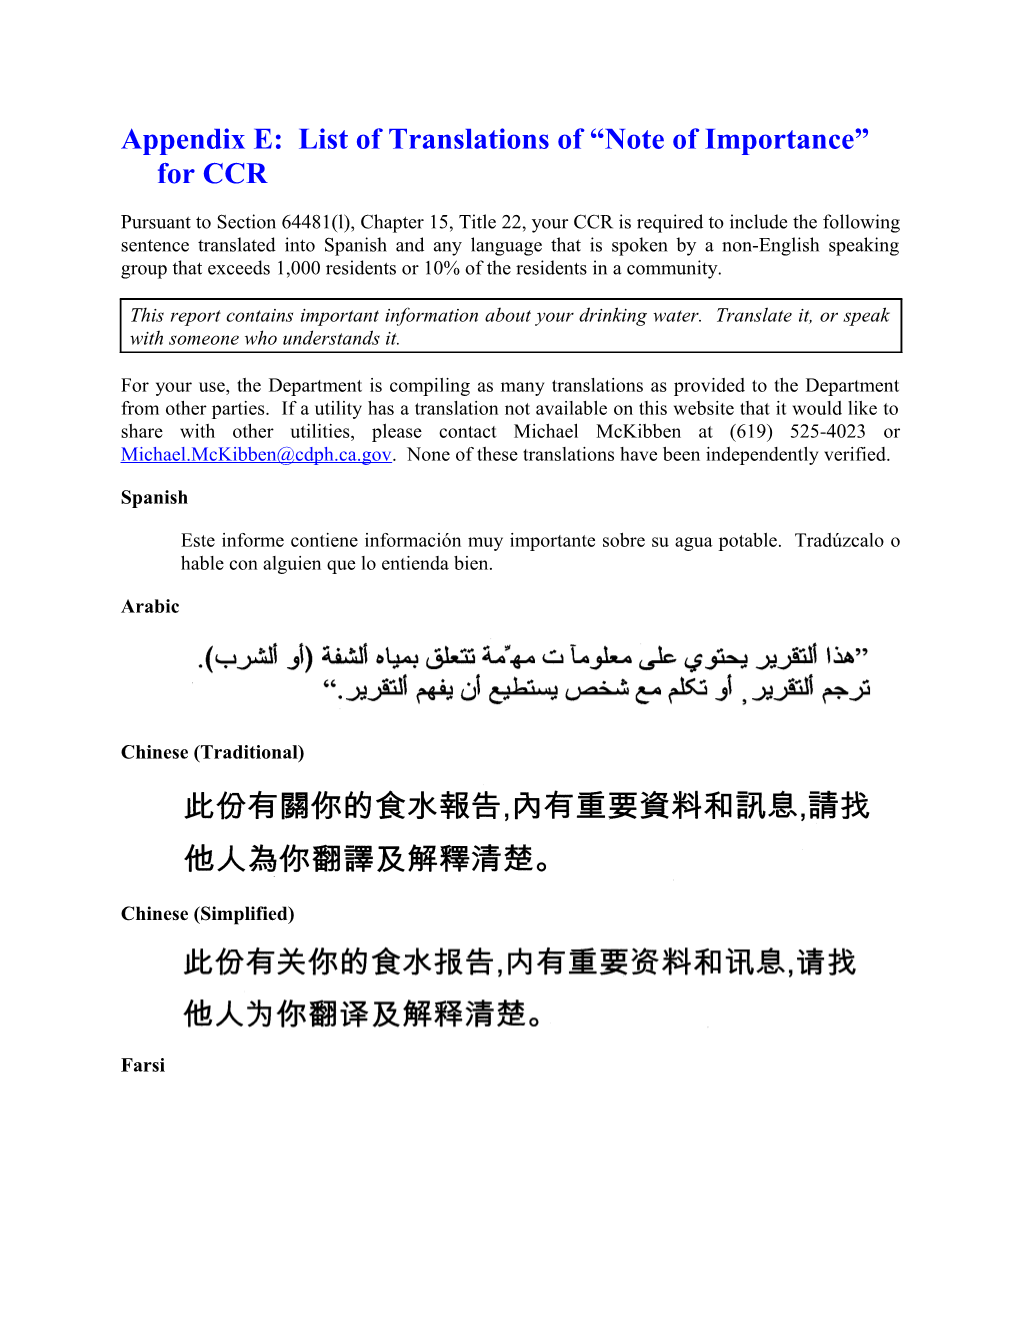 Appendix E: List of Translations of Note of Importance for CCR